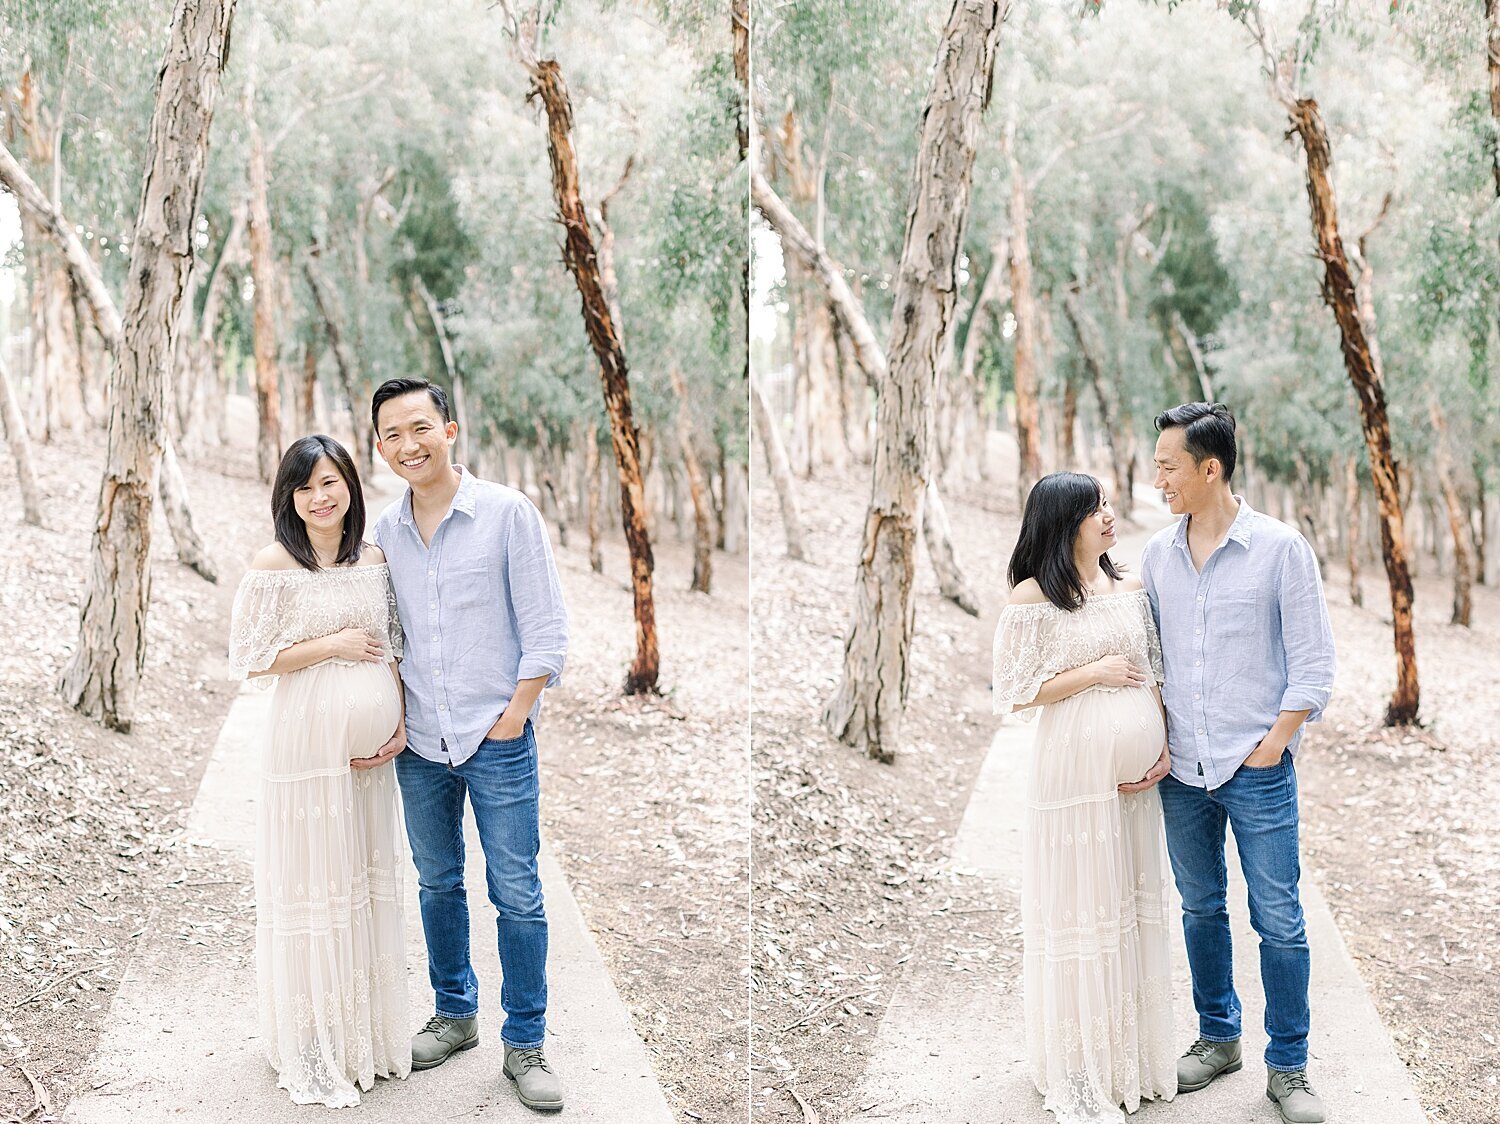 Maternity session for parents as they prepare for fourth baby. Photo by Ambre Williams Photography.